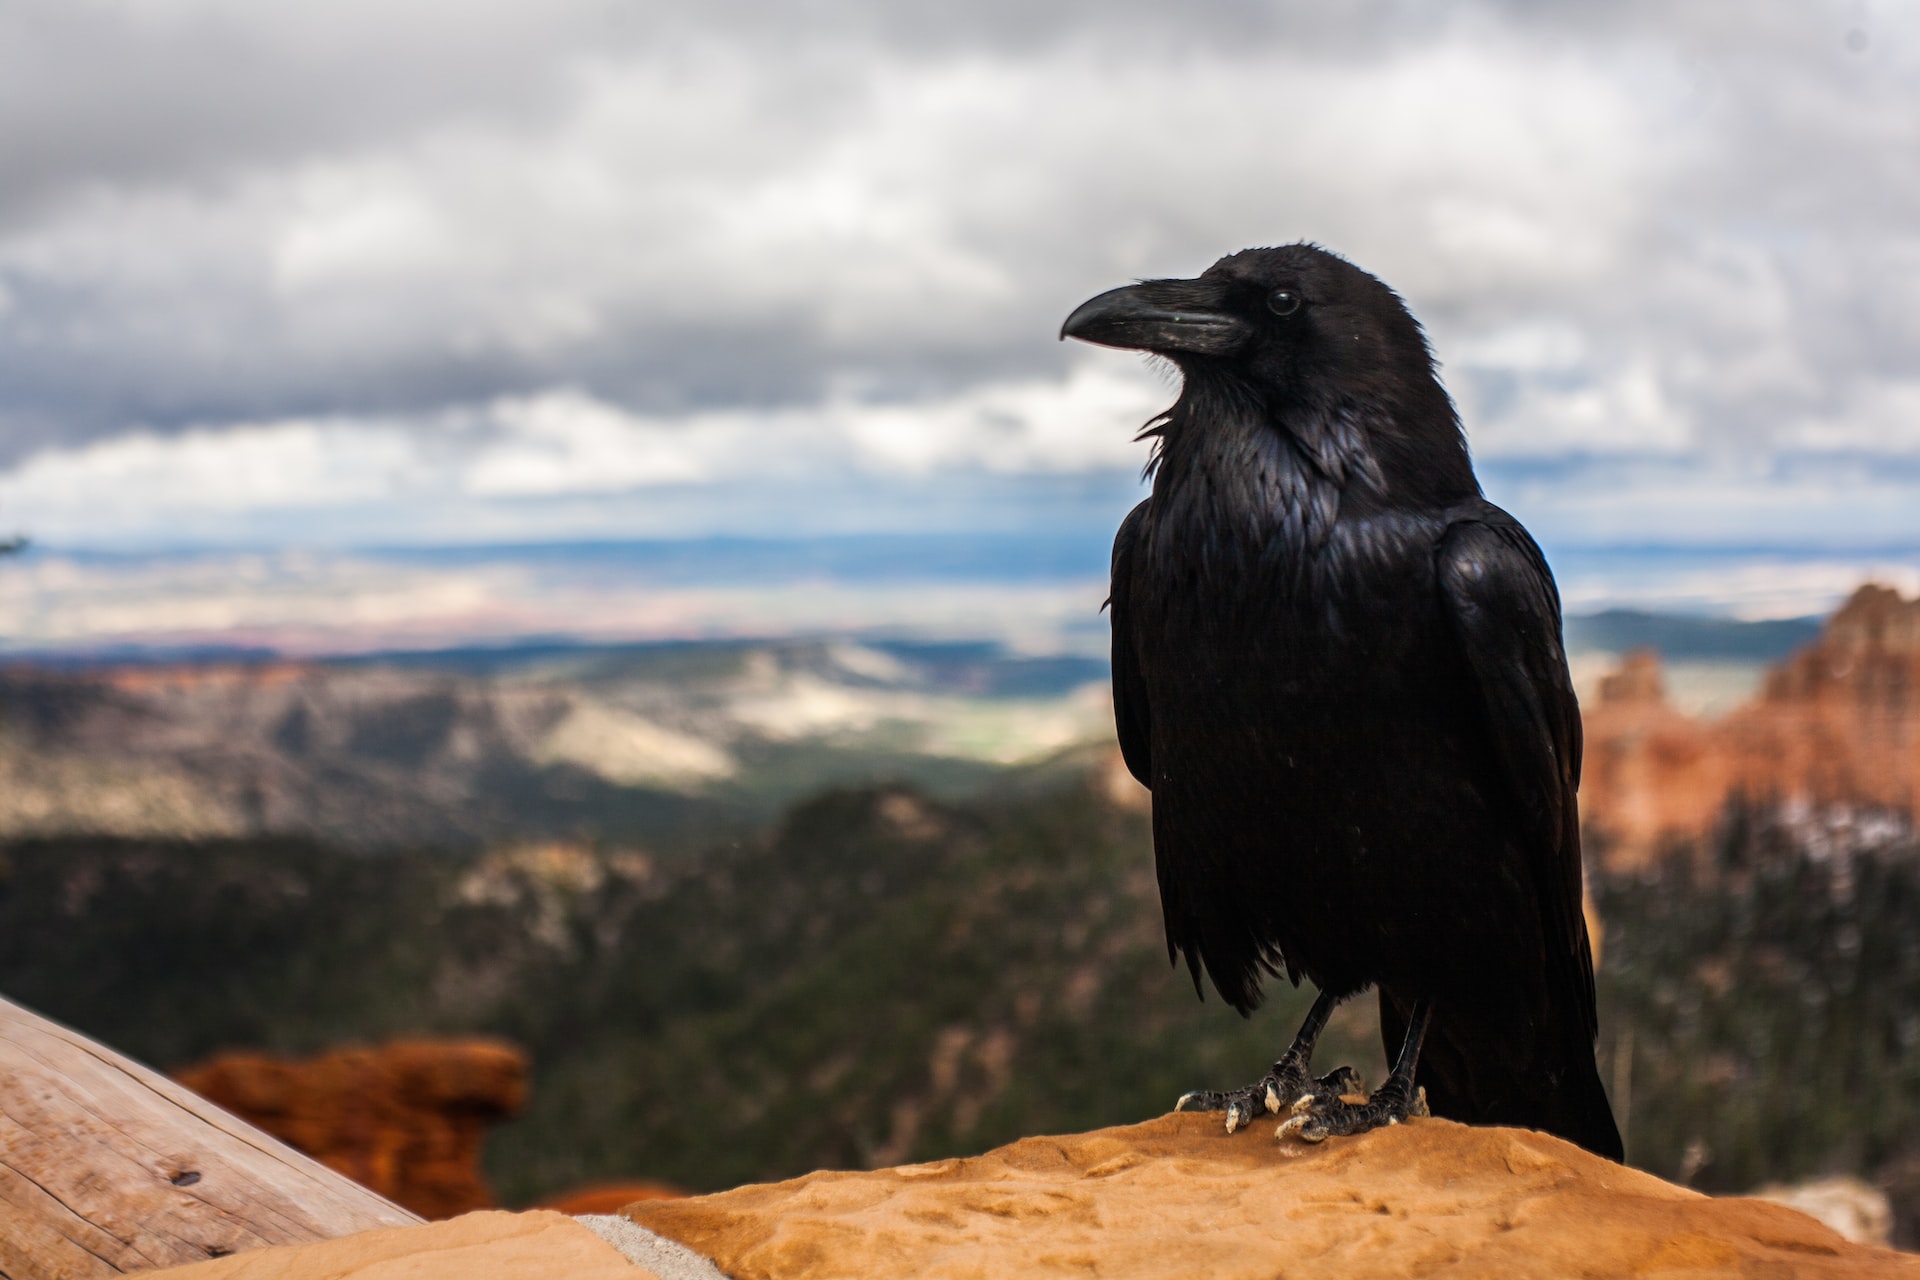 Crows Meaning Spirituality - The Spiritual Symbolism Of Crows